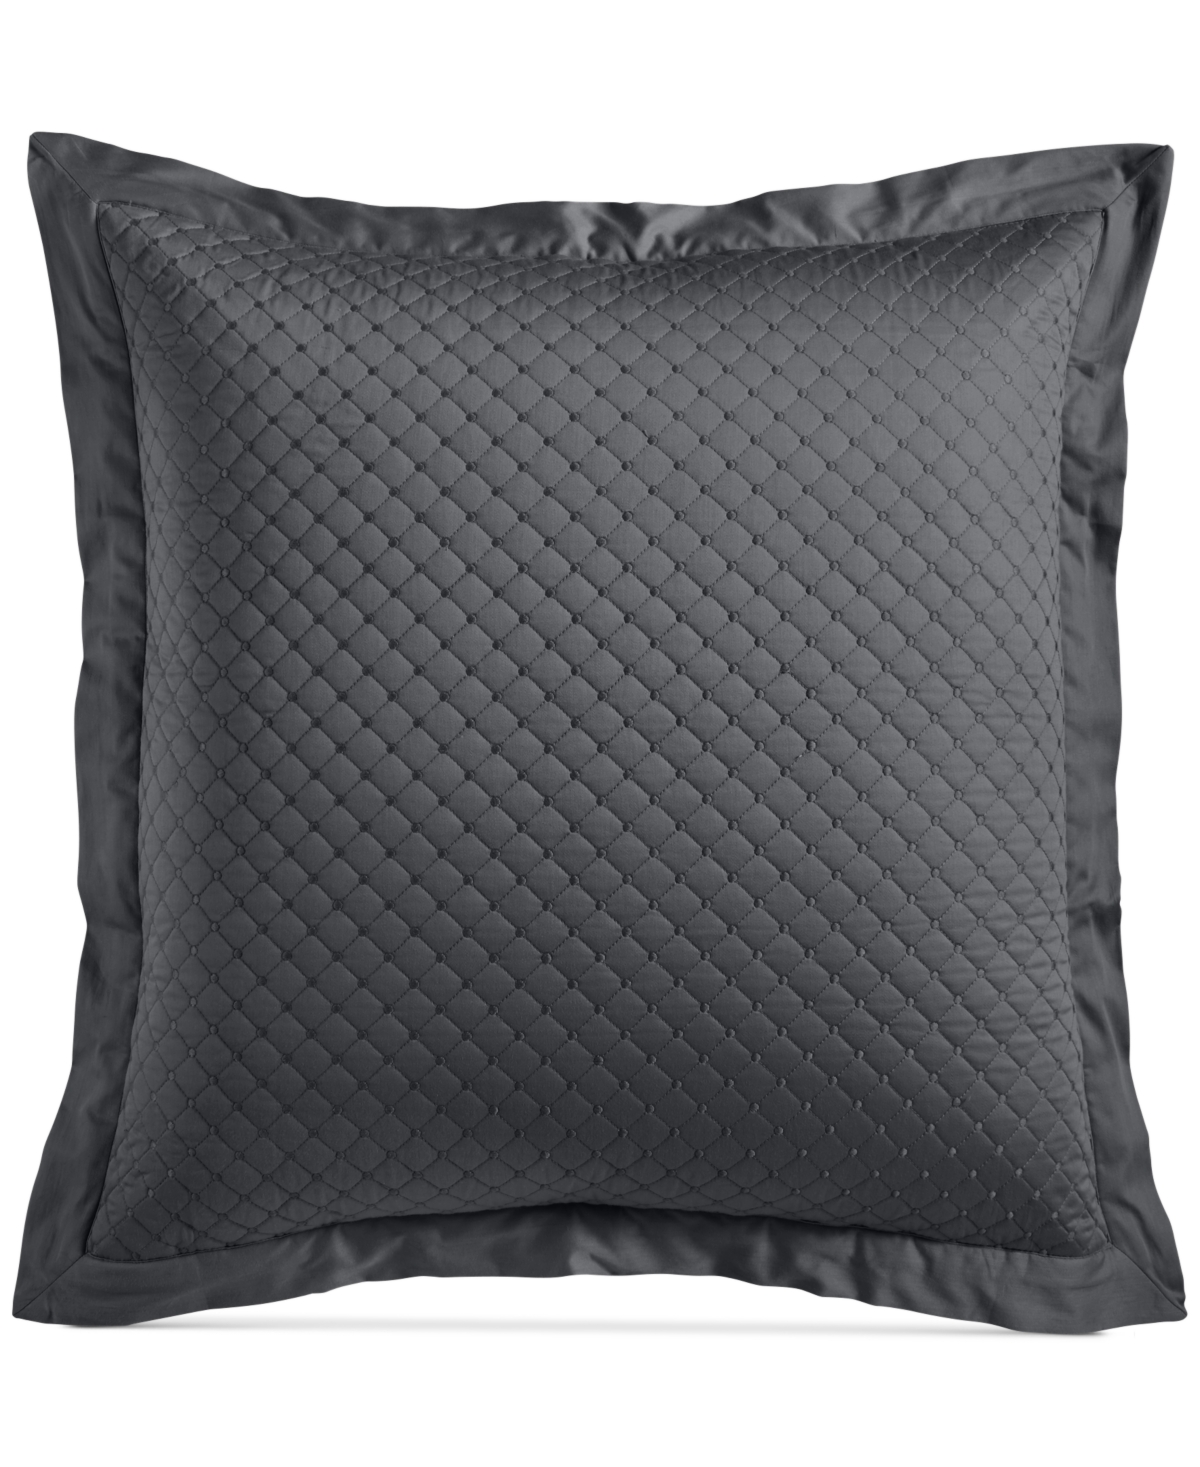 Damask Quilted Cotton Sham, European, Created for Macy's - Marble